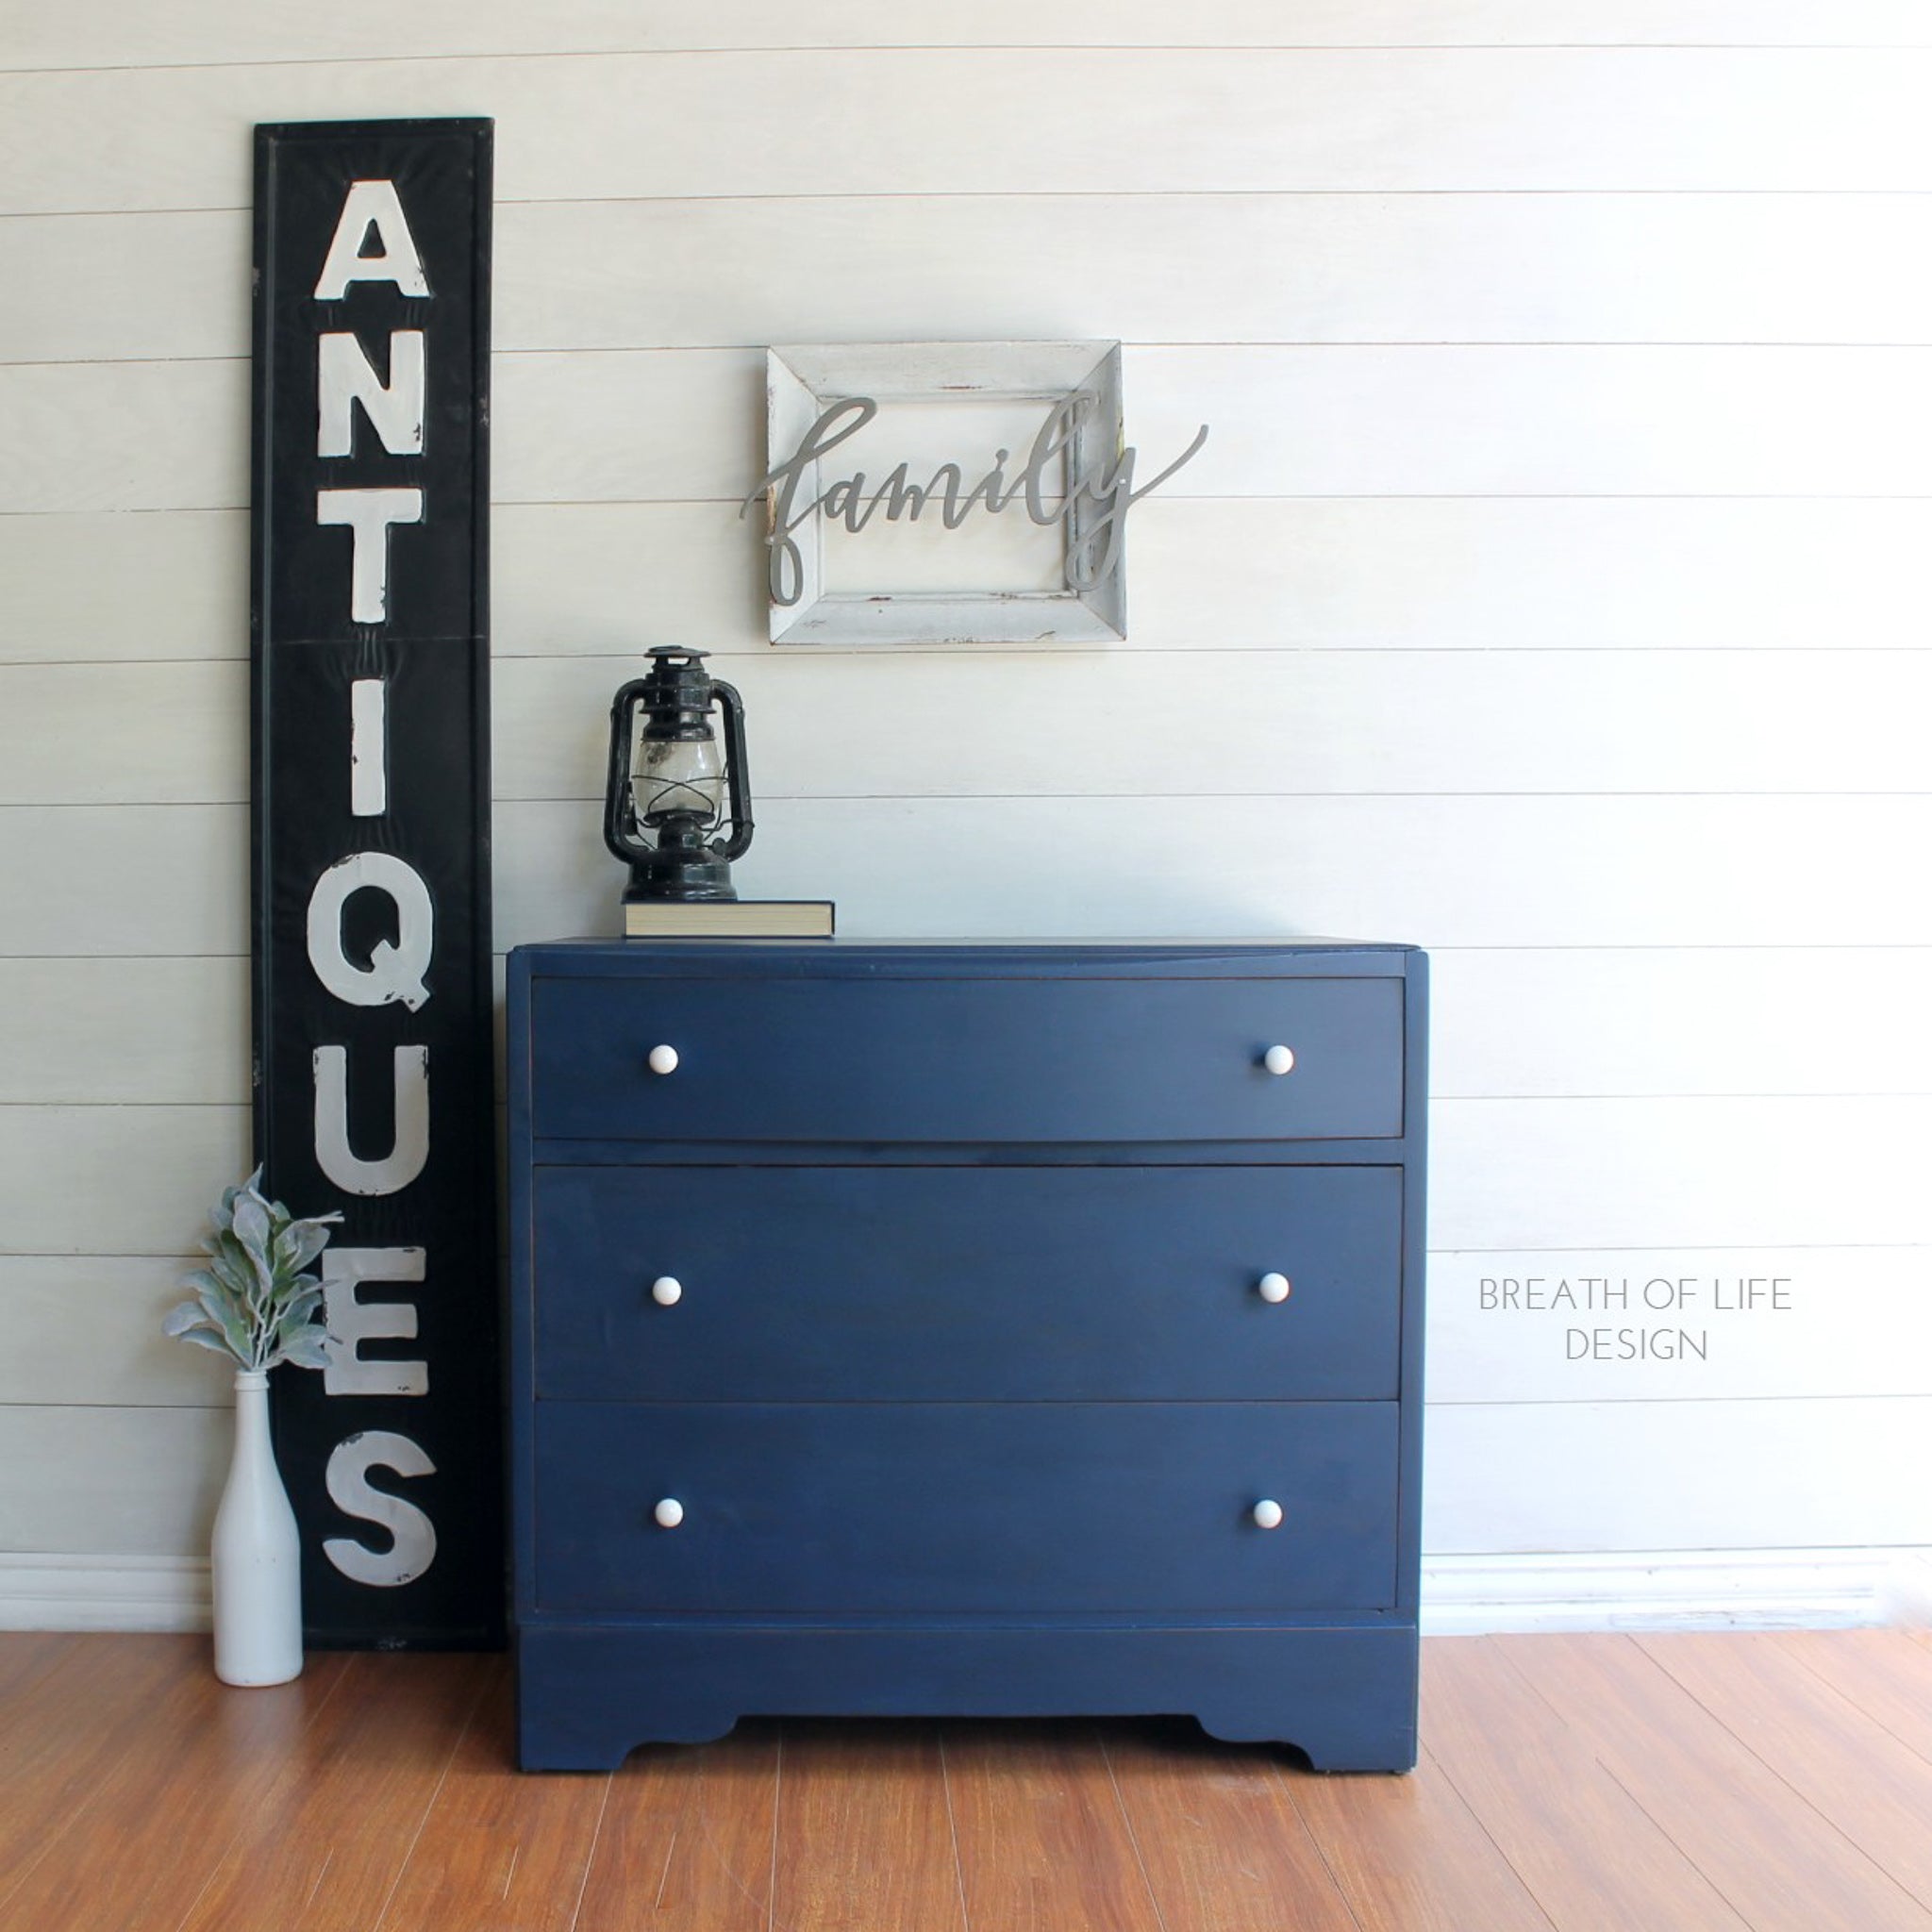 A 3-drawer dresser refurbished by Breath of Life Design is painted with Dixie Belle's Bunker Hill Blue chalk mineral paint. A large black and white sign that says "Antiques" sits to the left of the dresser.